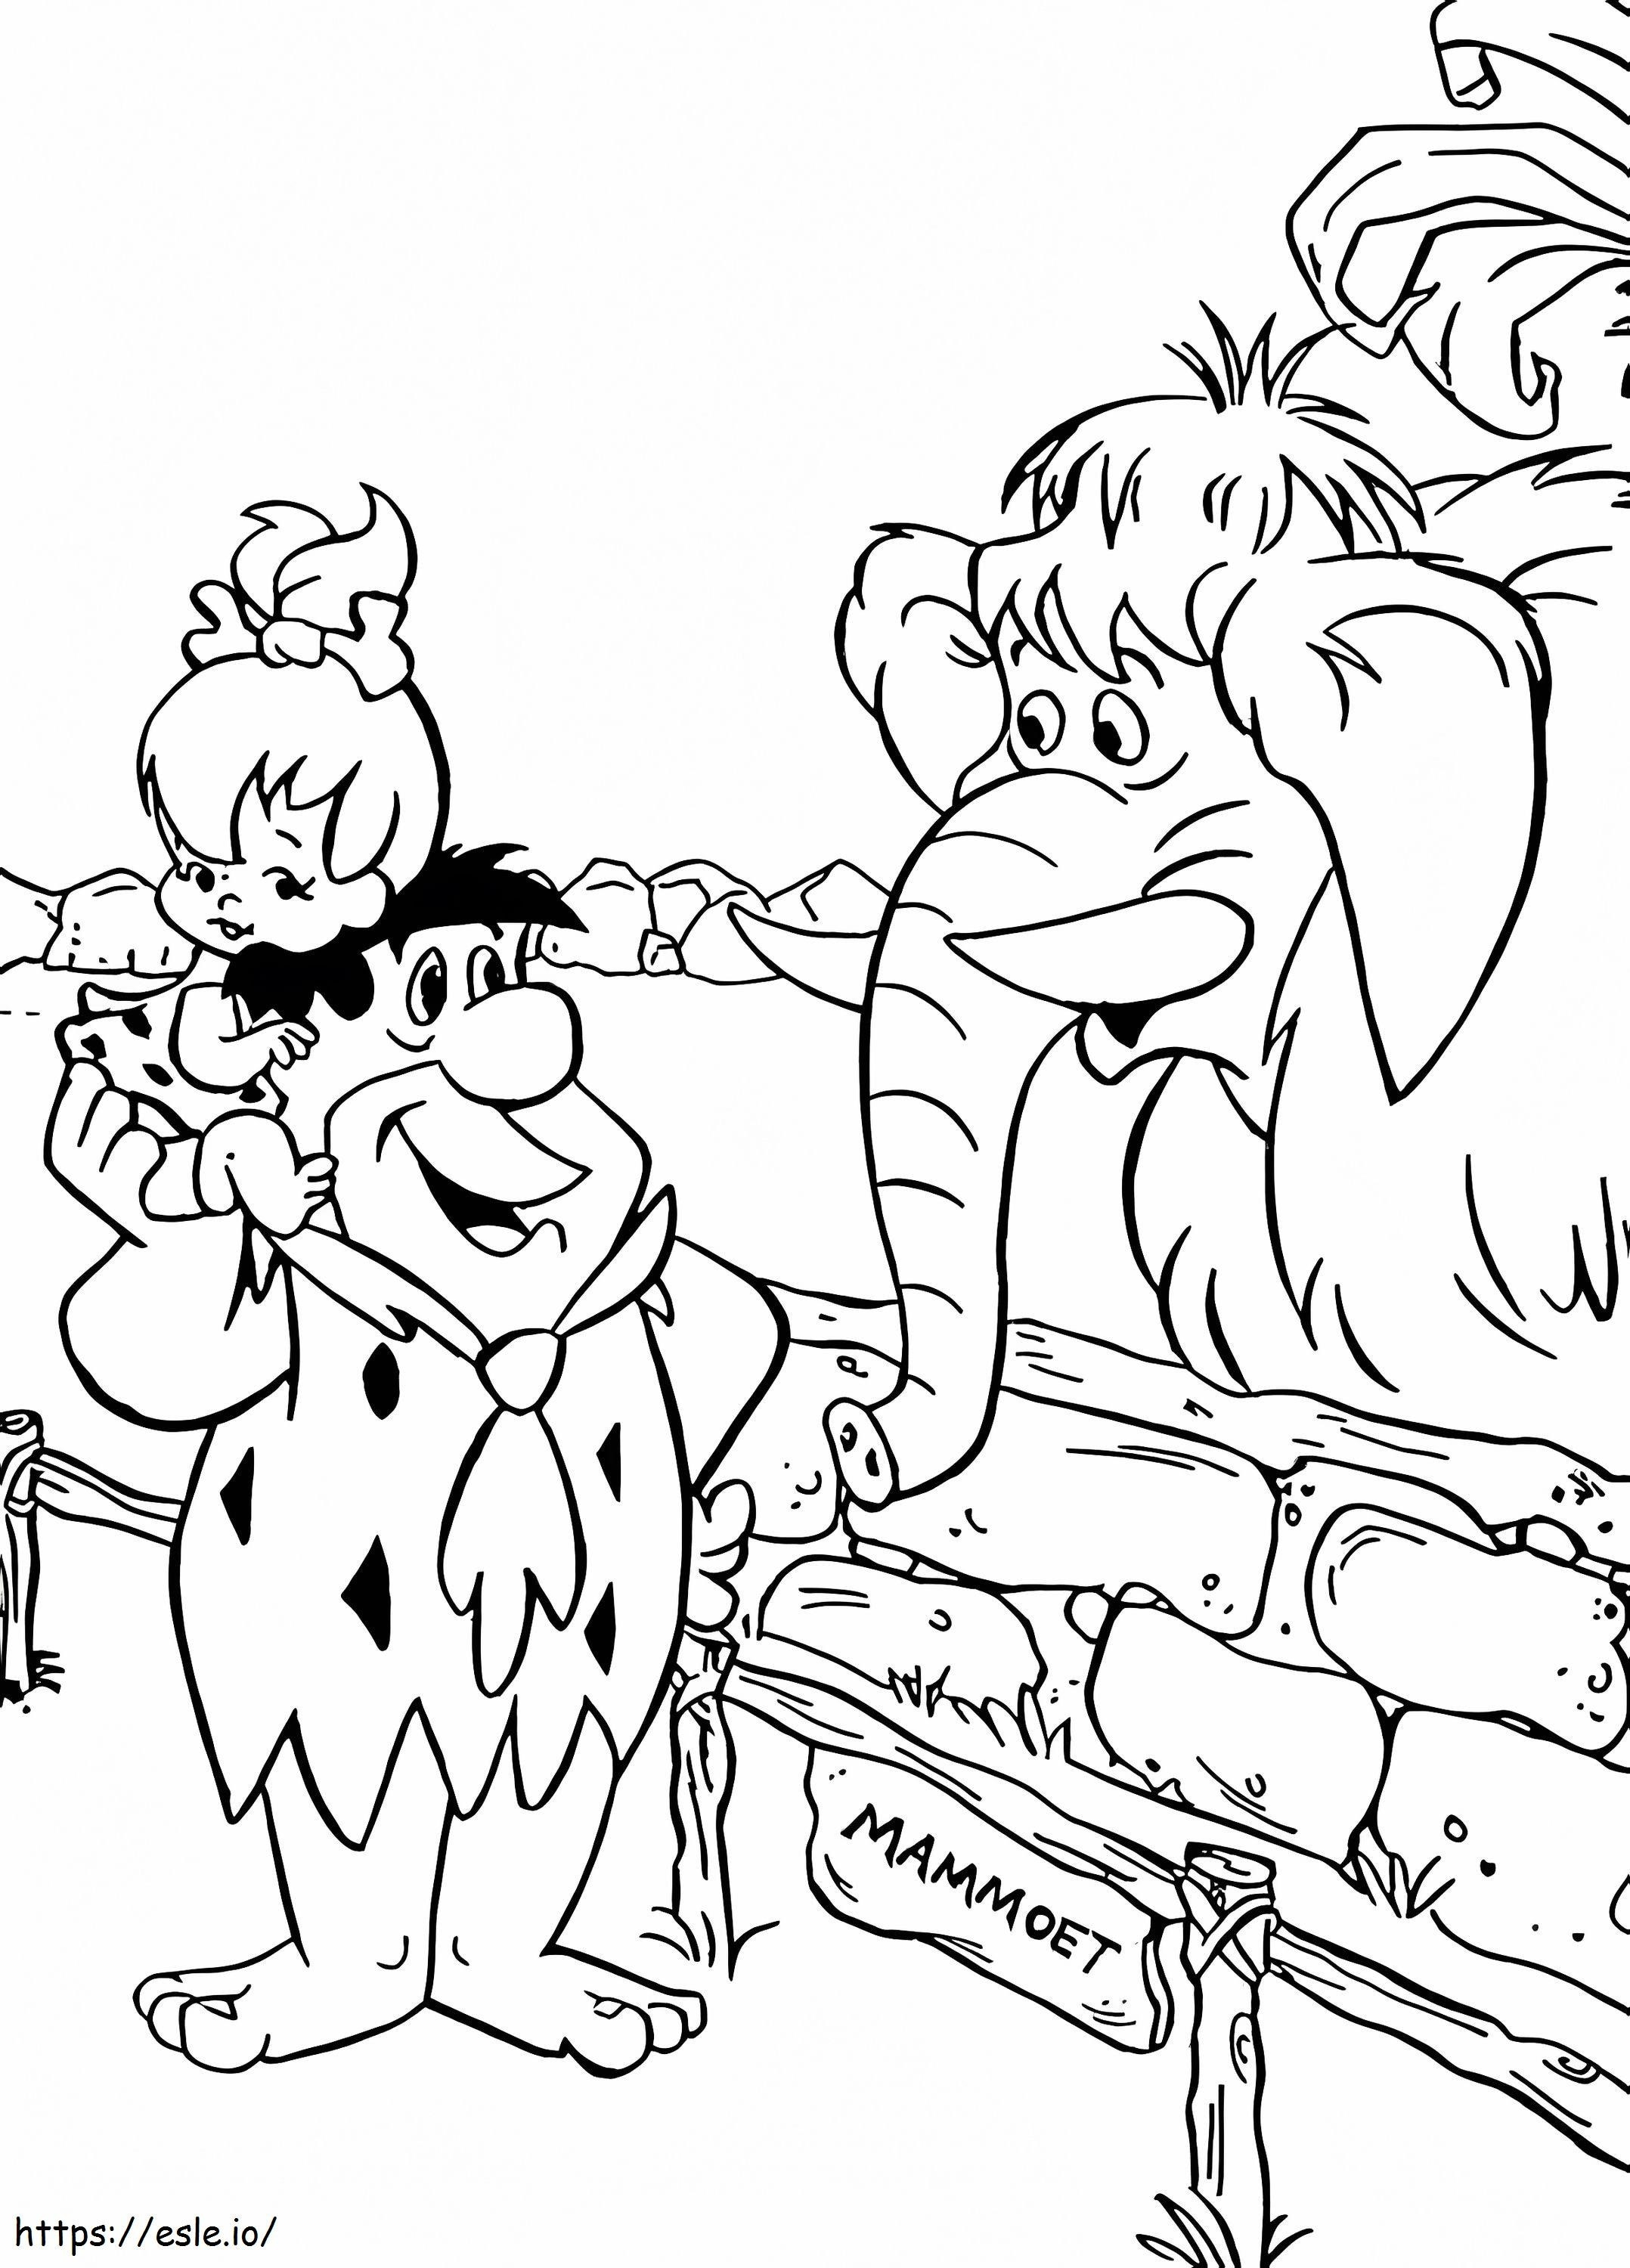 Fred Flintstones Goes To The Zoo coloring page